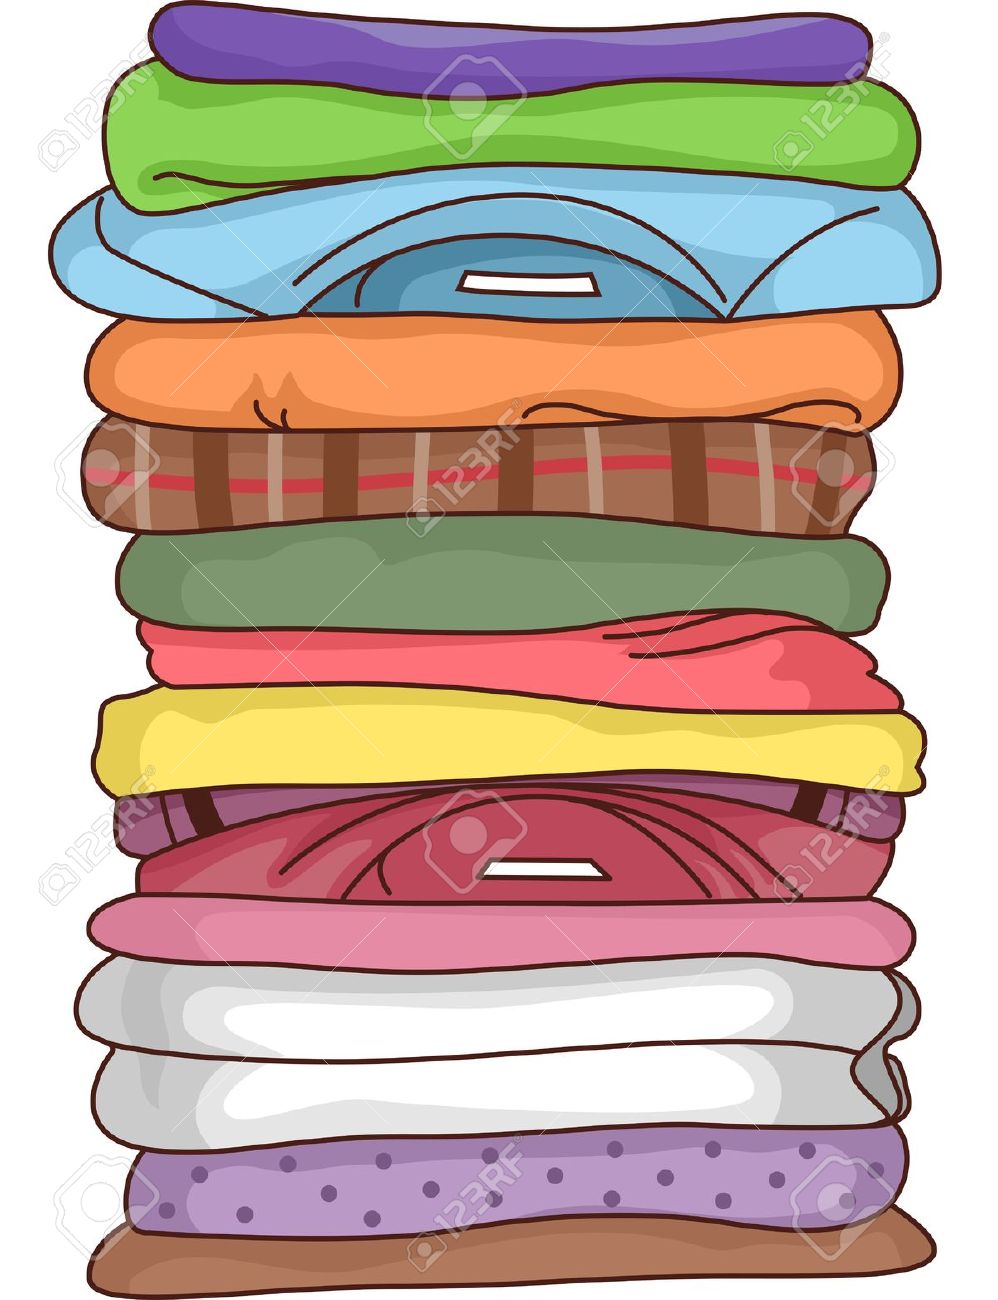 Clothing png,fabric clipart,clothing clipart,wearing apparel clipart,stac.....